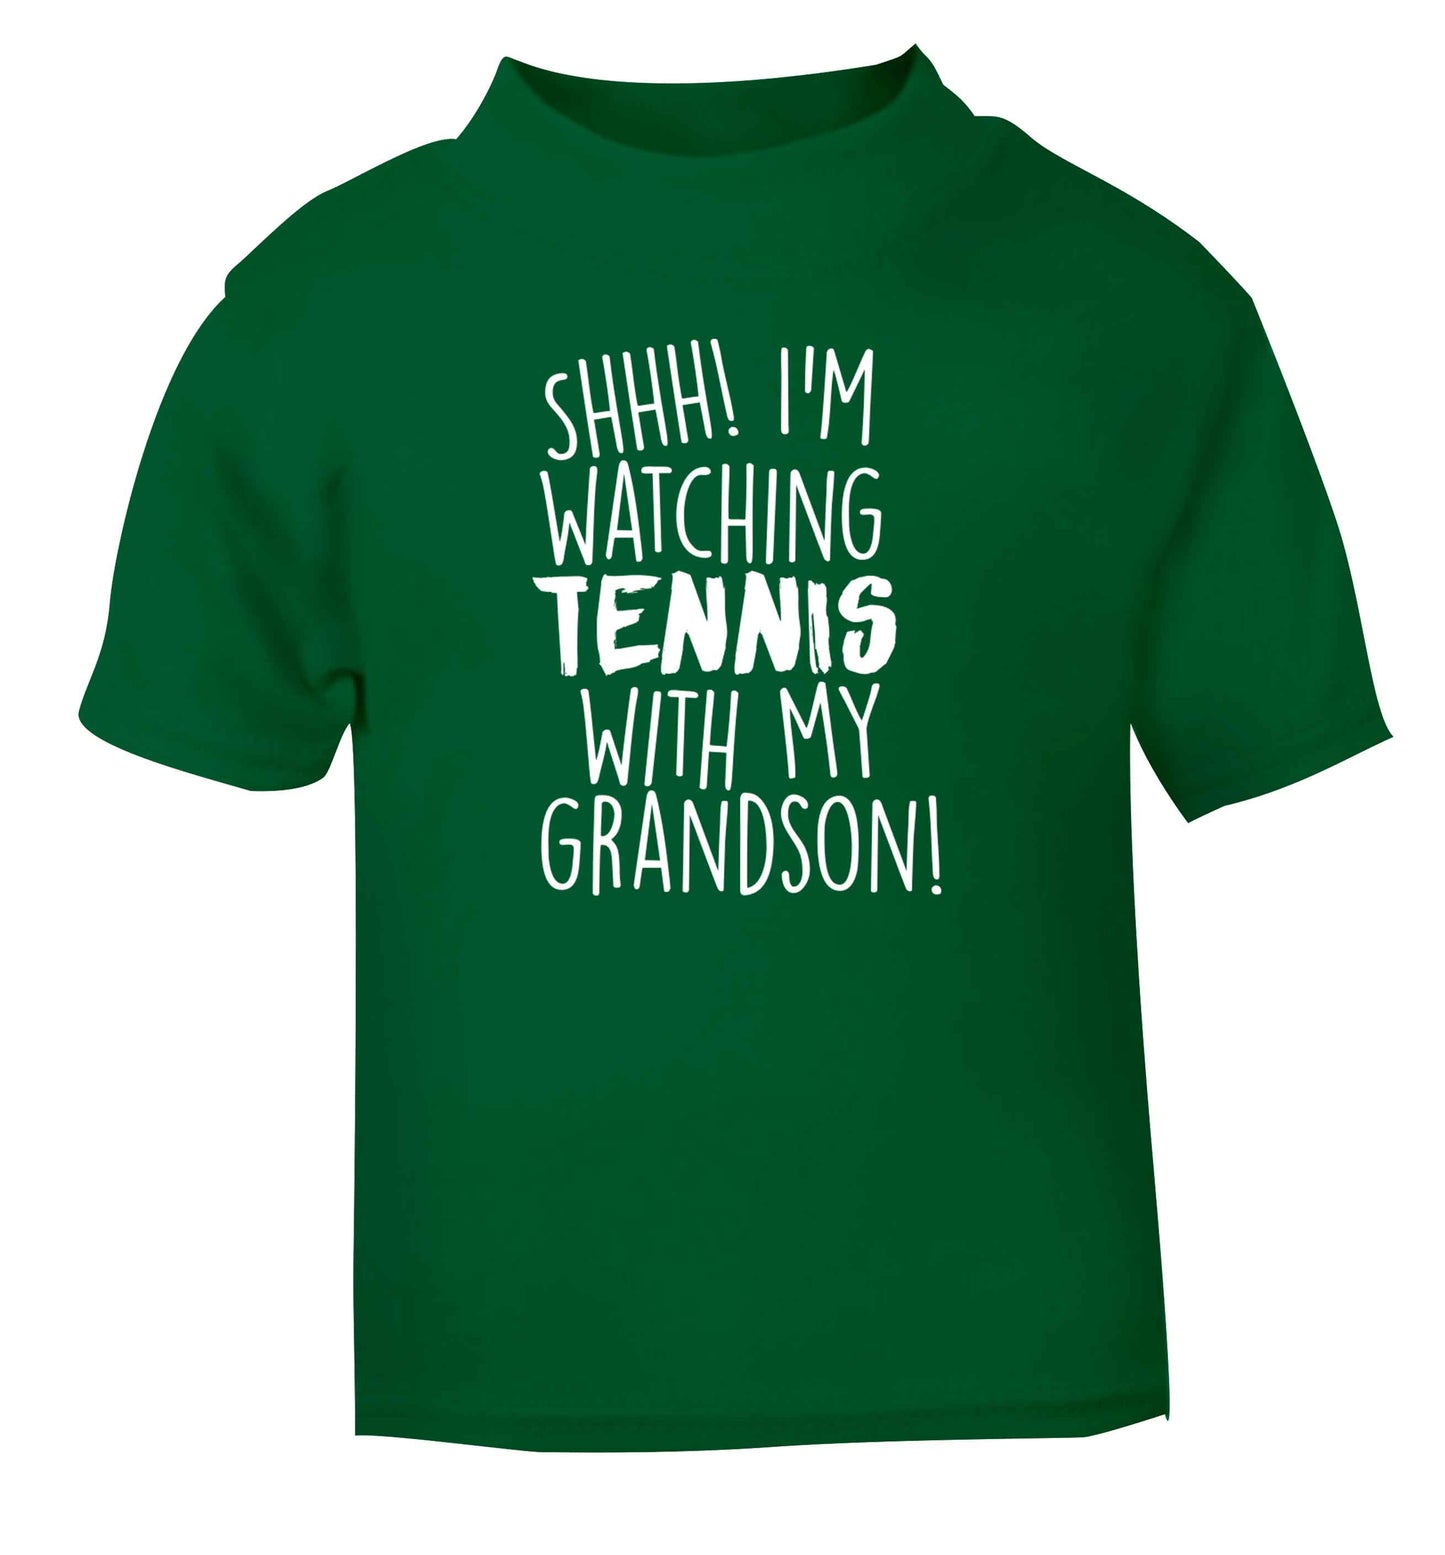 Shh! I'm watching tennis with my grandson! green Baby Toddler Tshirt 2 Years